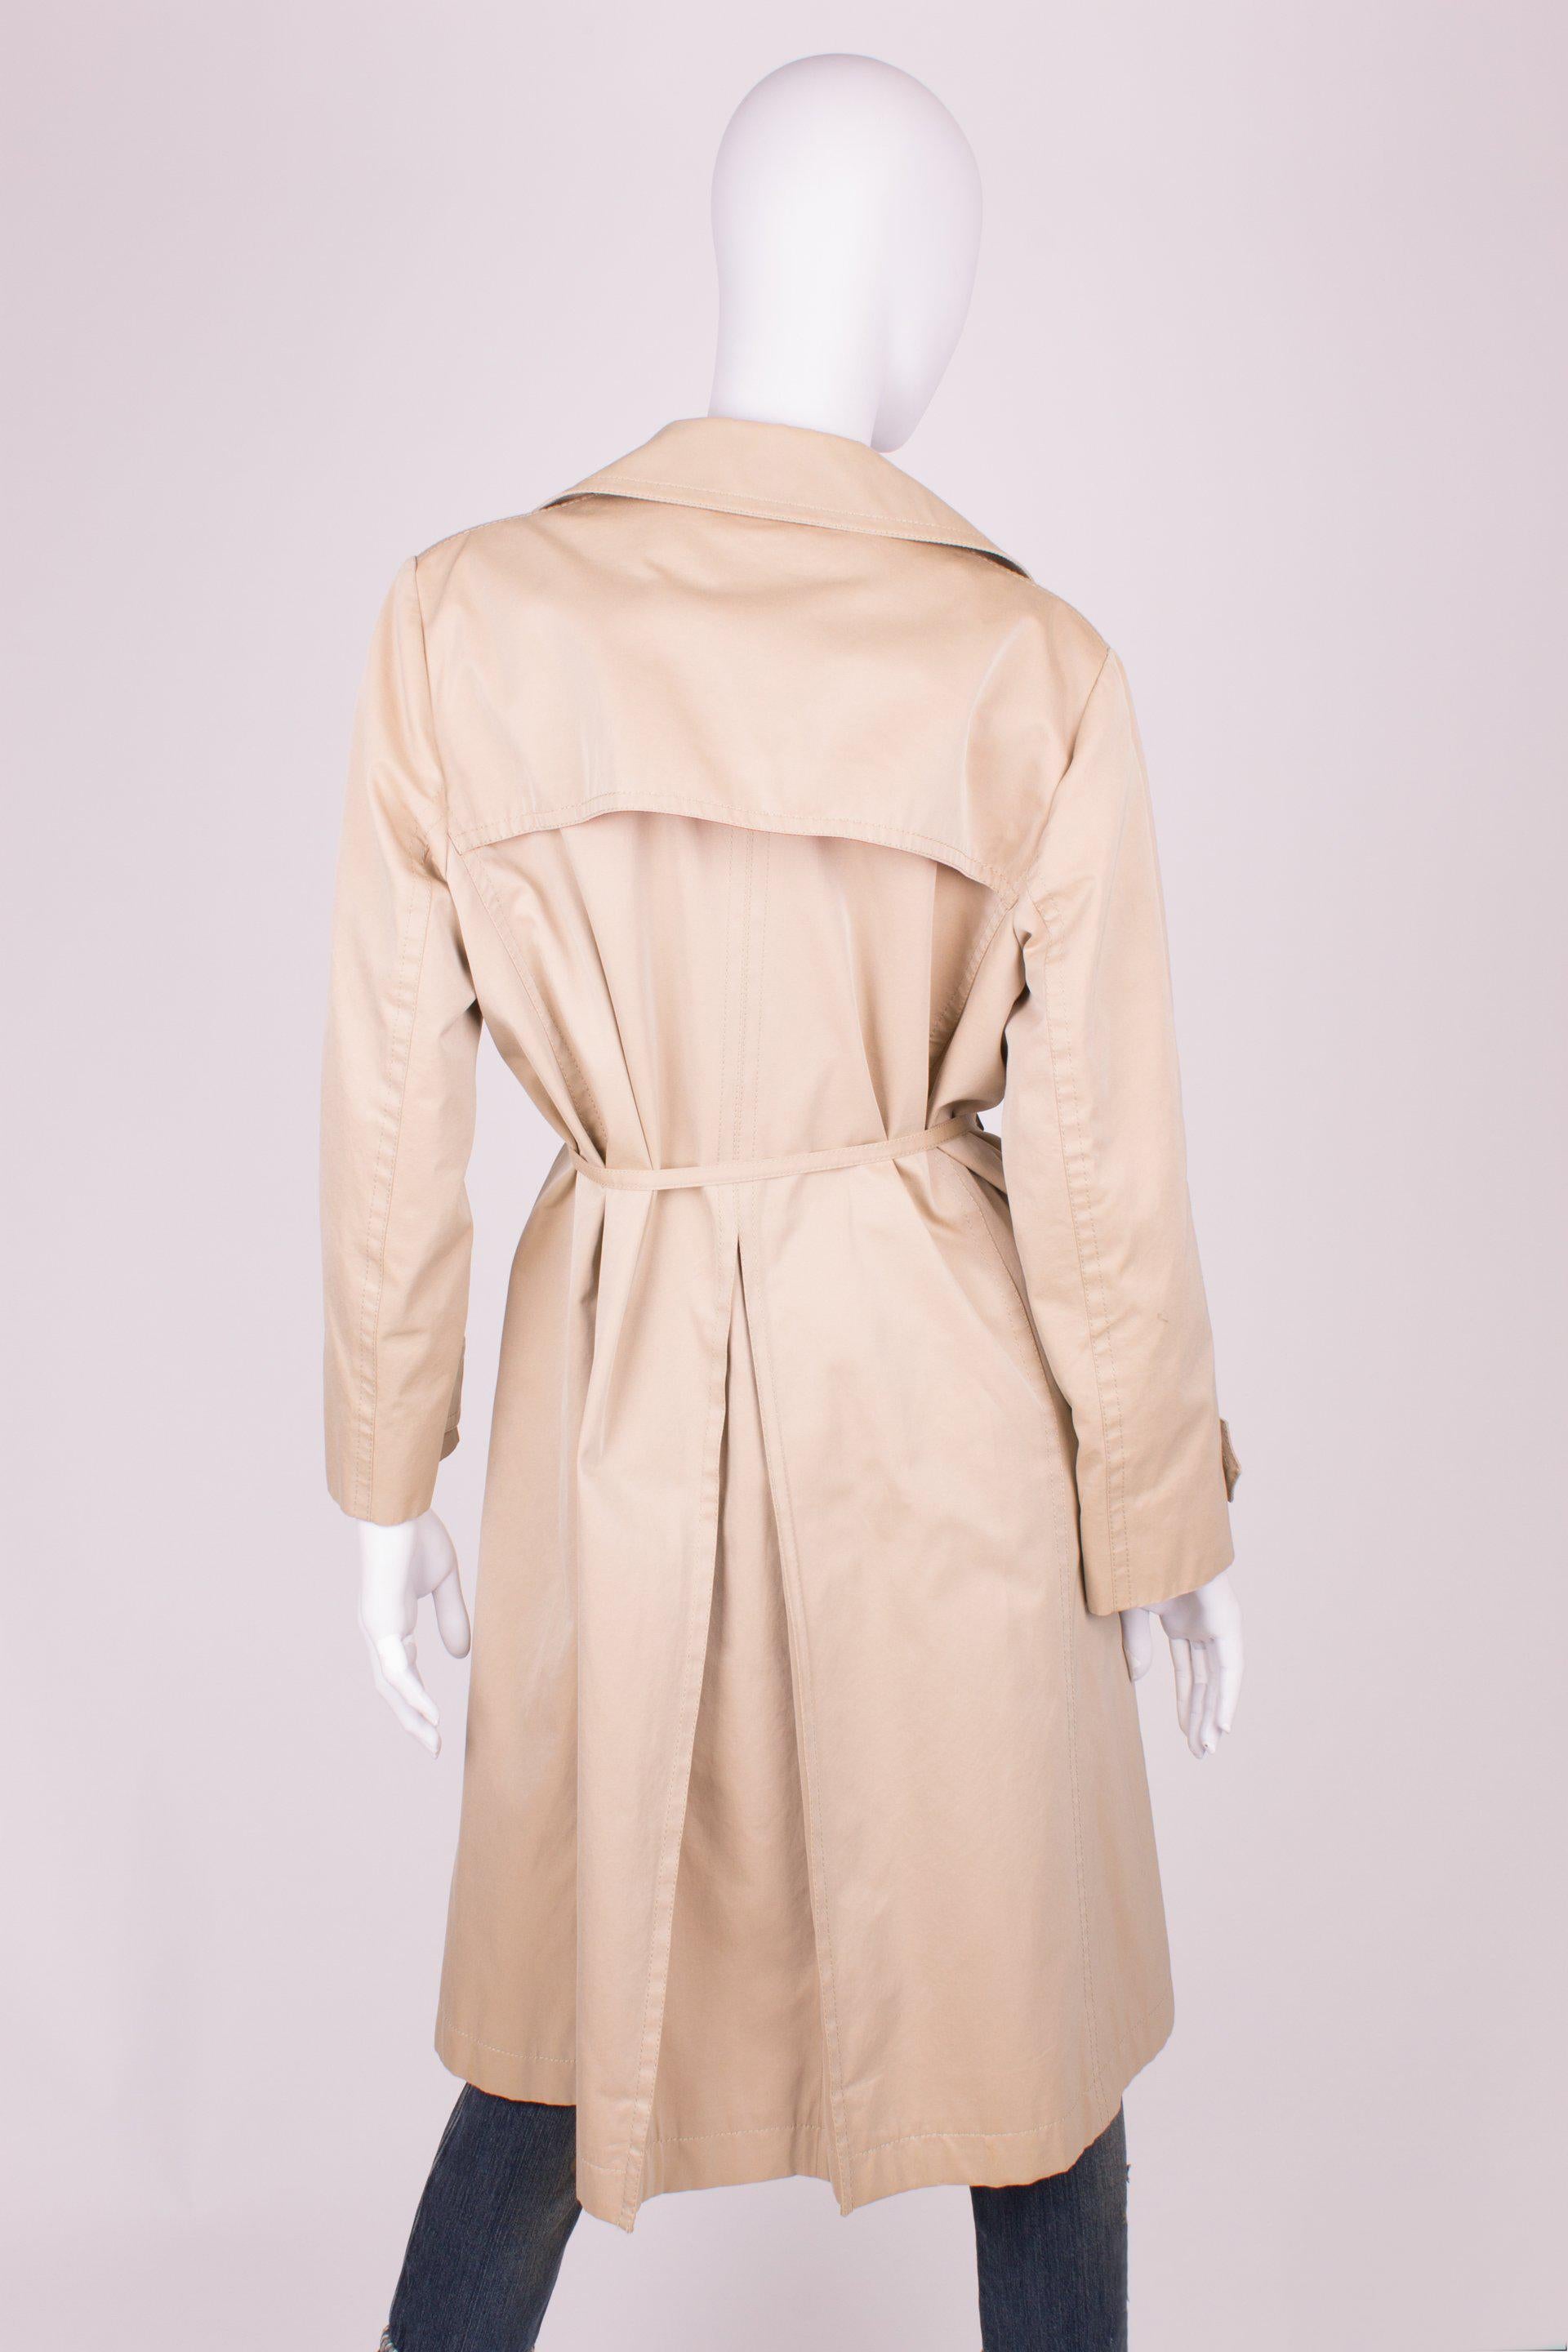 Timeless Yves Saint Laurent Rive Gauche Trenchcoat, of course in classical beige.

This vintage coat has a rather lar

ge collar and closes with five off-white buttons at the front with the words Yves Saint Laurent. At the end of the long sleeves a